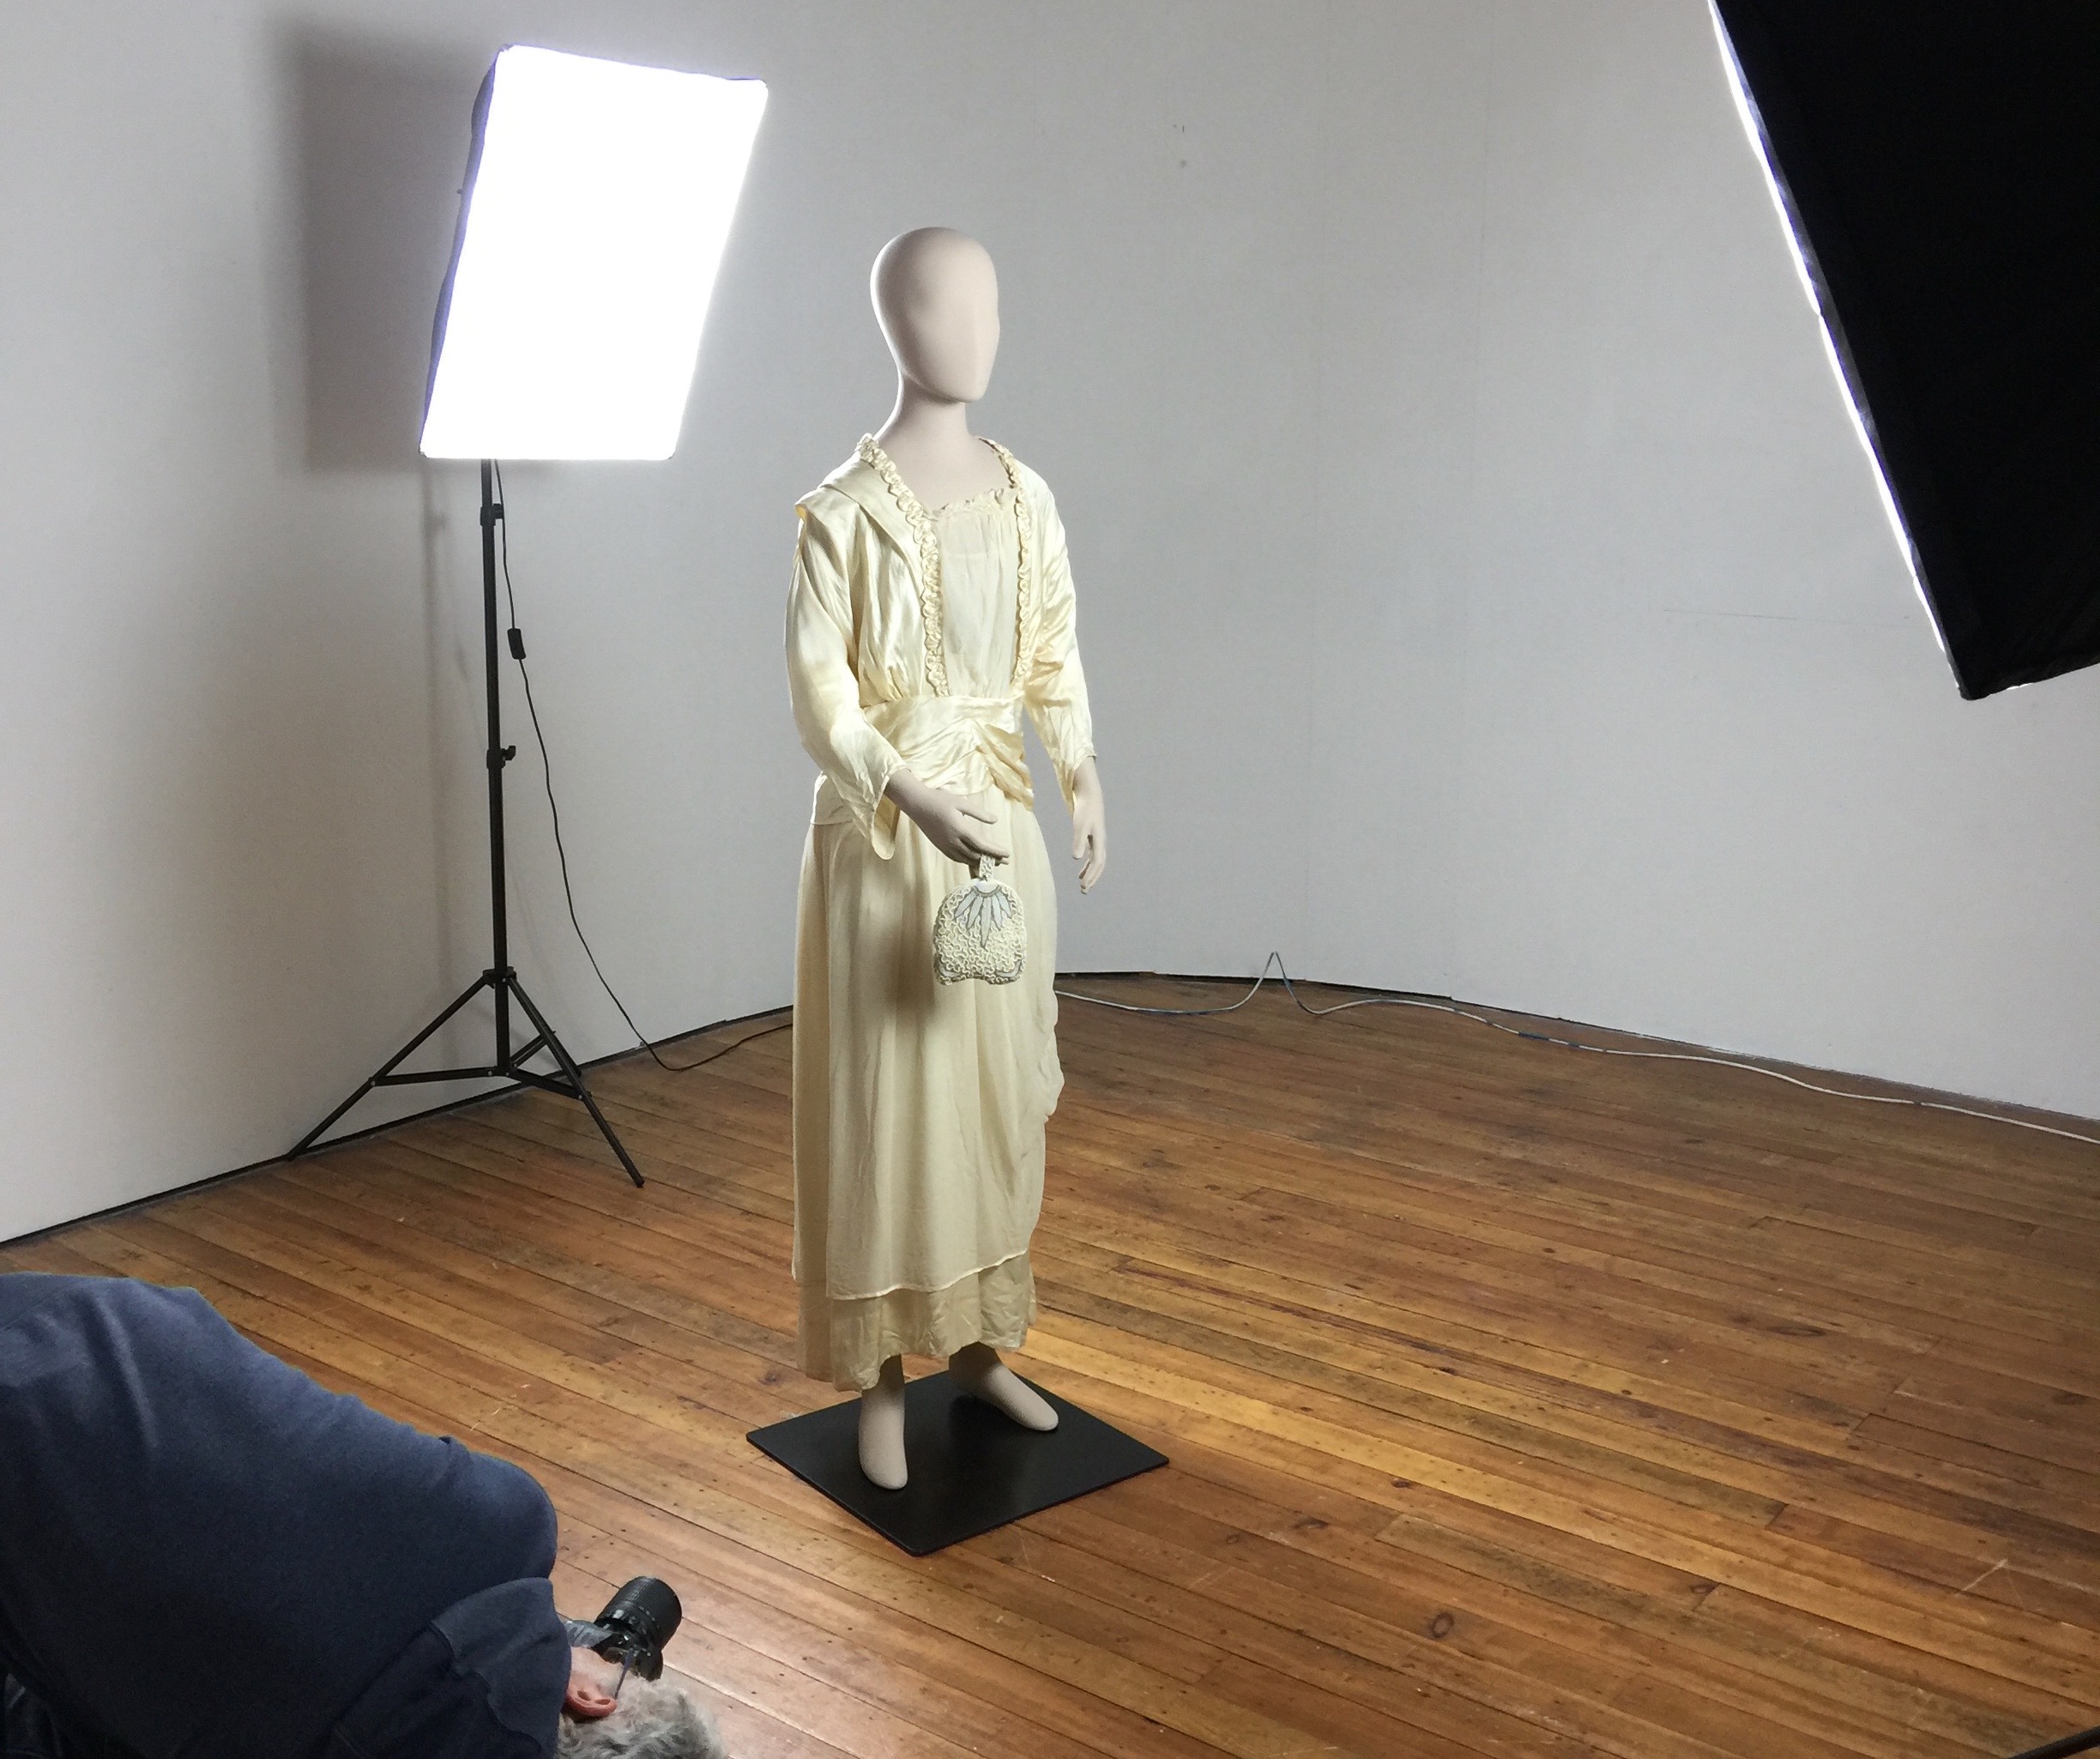 A volunteer photographs the dressed mannequin from every angle to ensure good coverage for photogrammetry